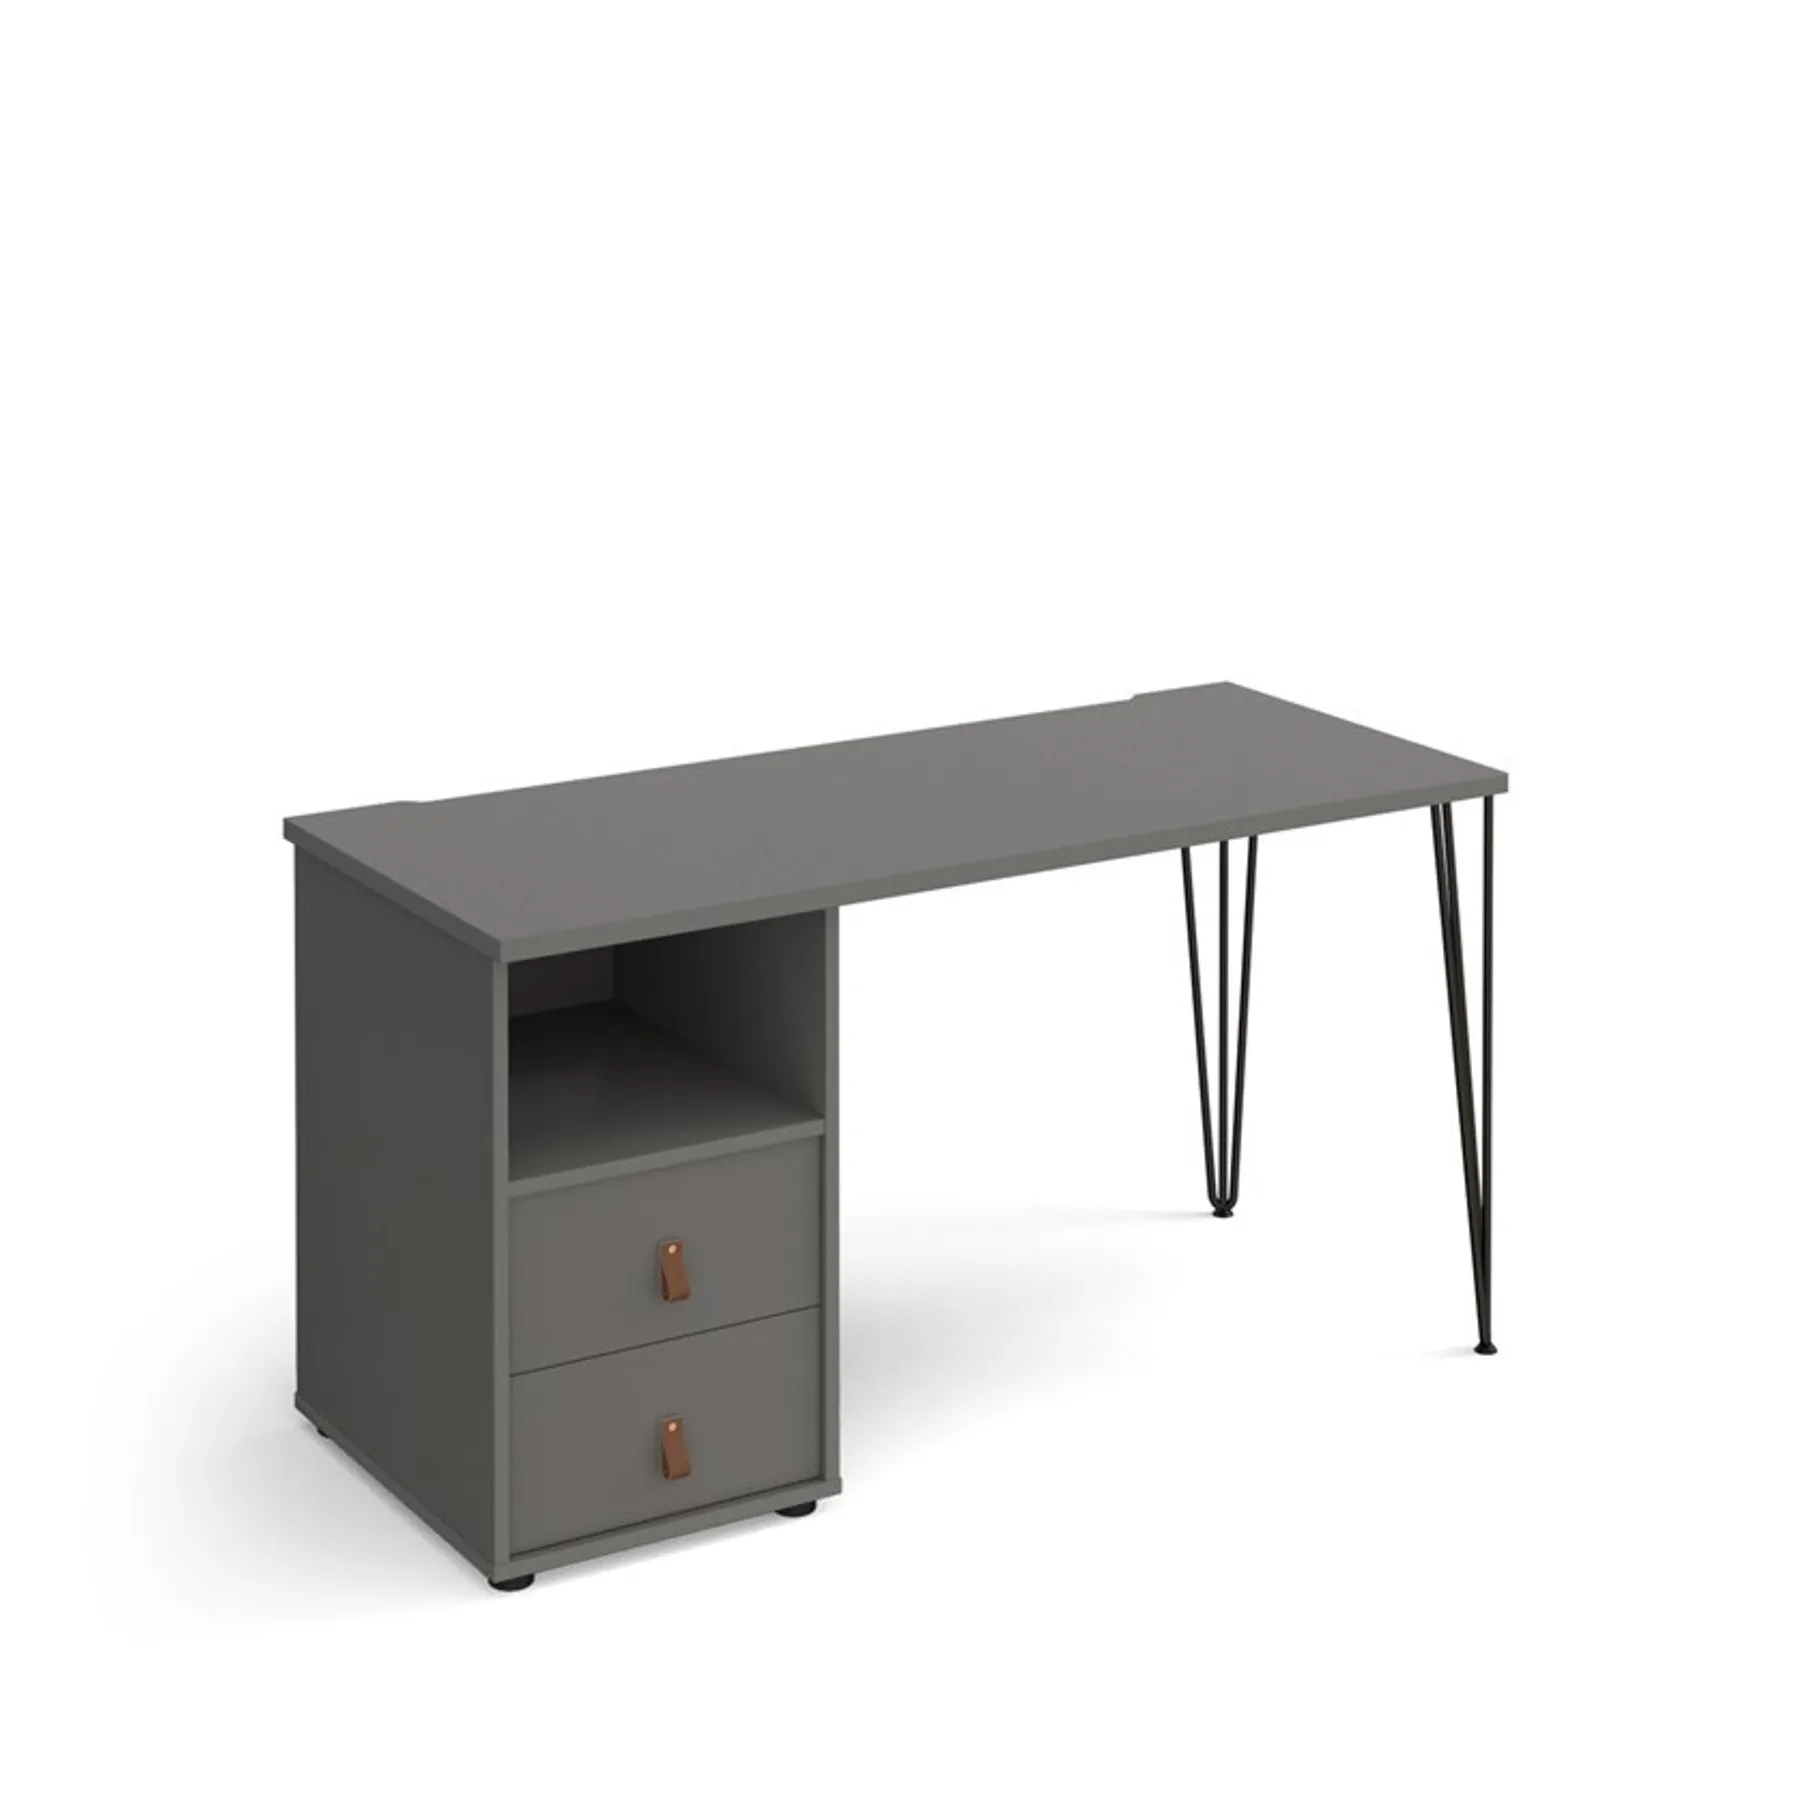 LOF Direct Dams Tikal Hairpin Home Office Desk with drawers Grey TK614 P D